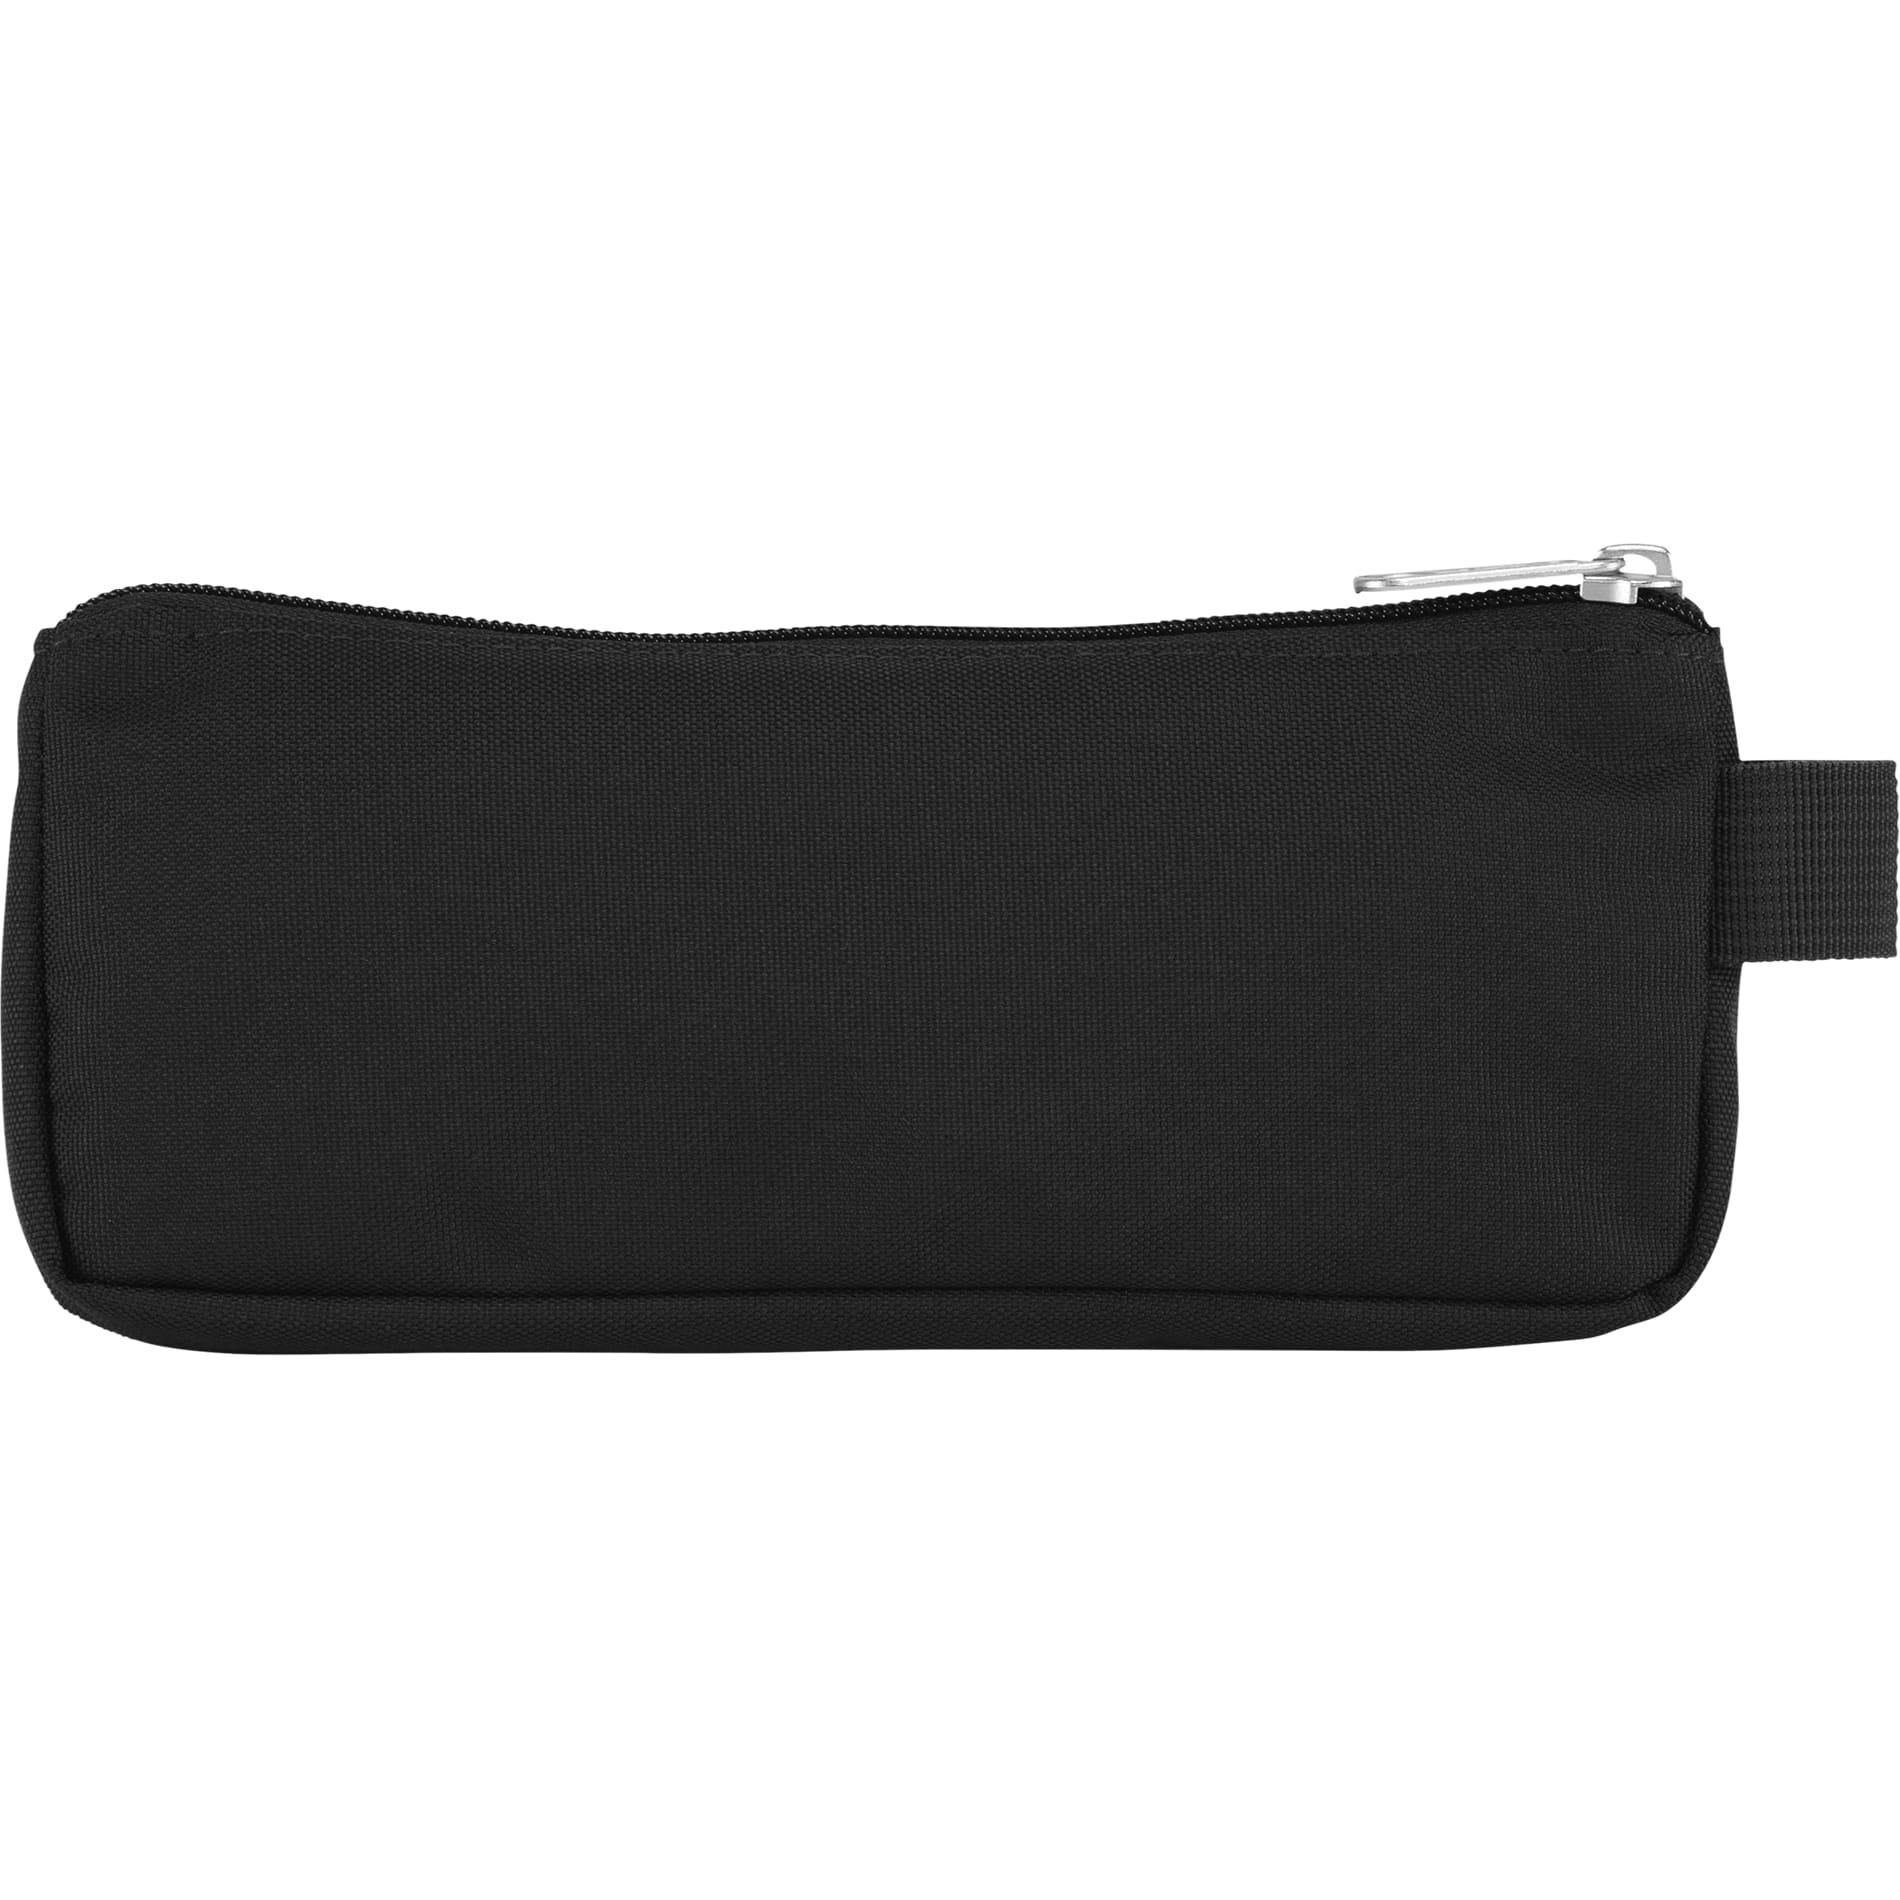 JanSport Basic Accessory Pouch - additional Image 1